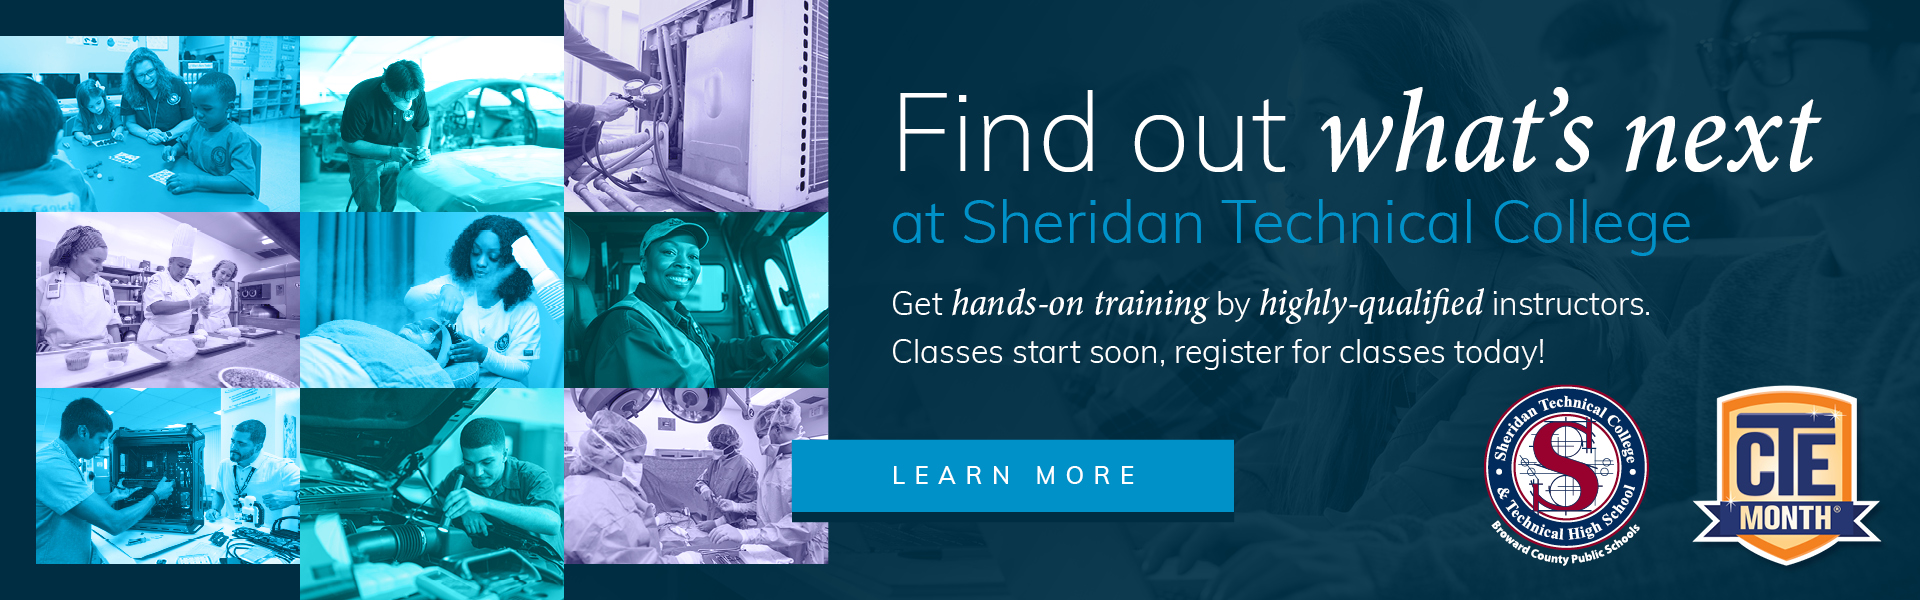 find out what's next at Sheridan Technical College